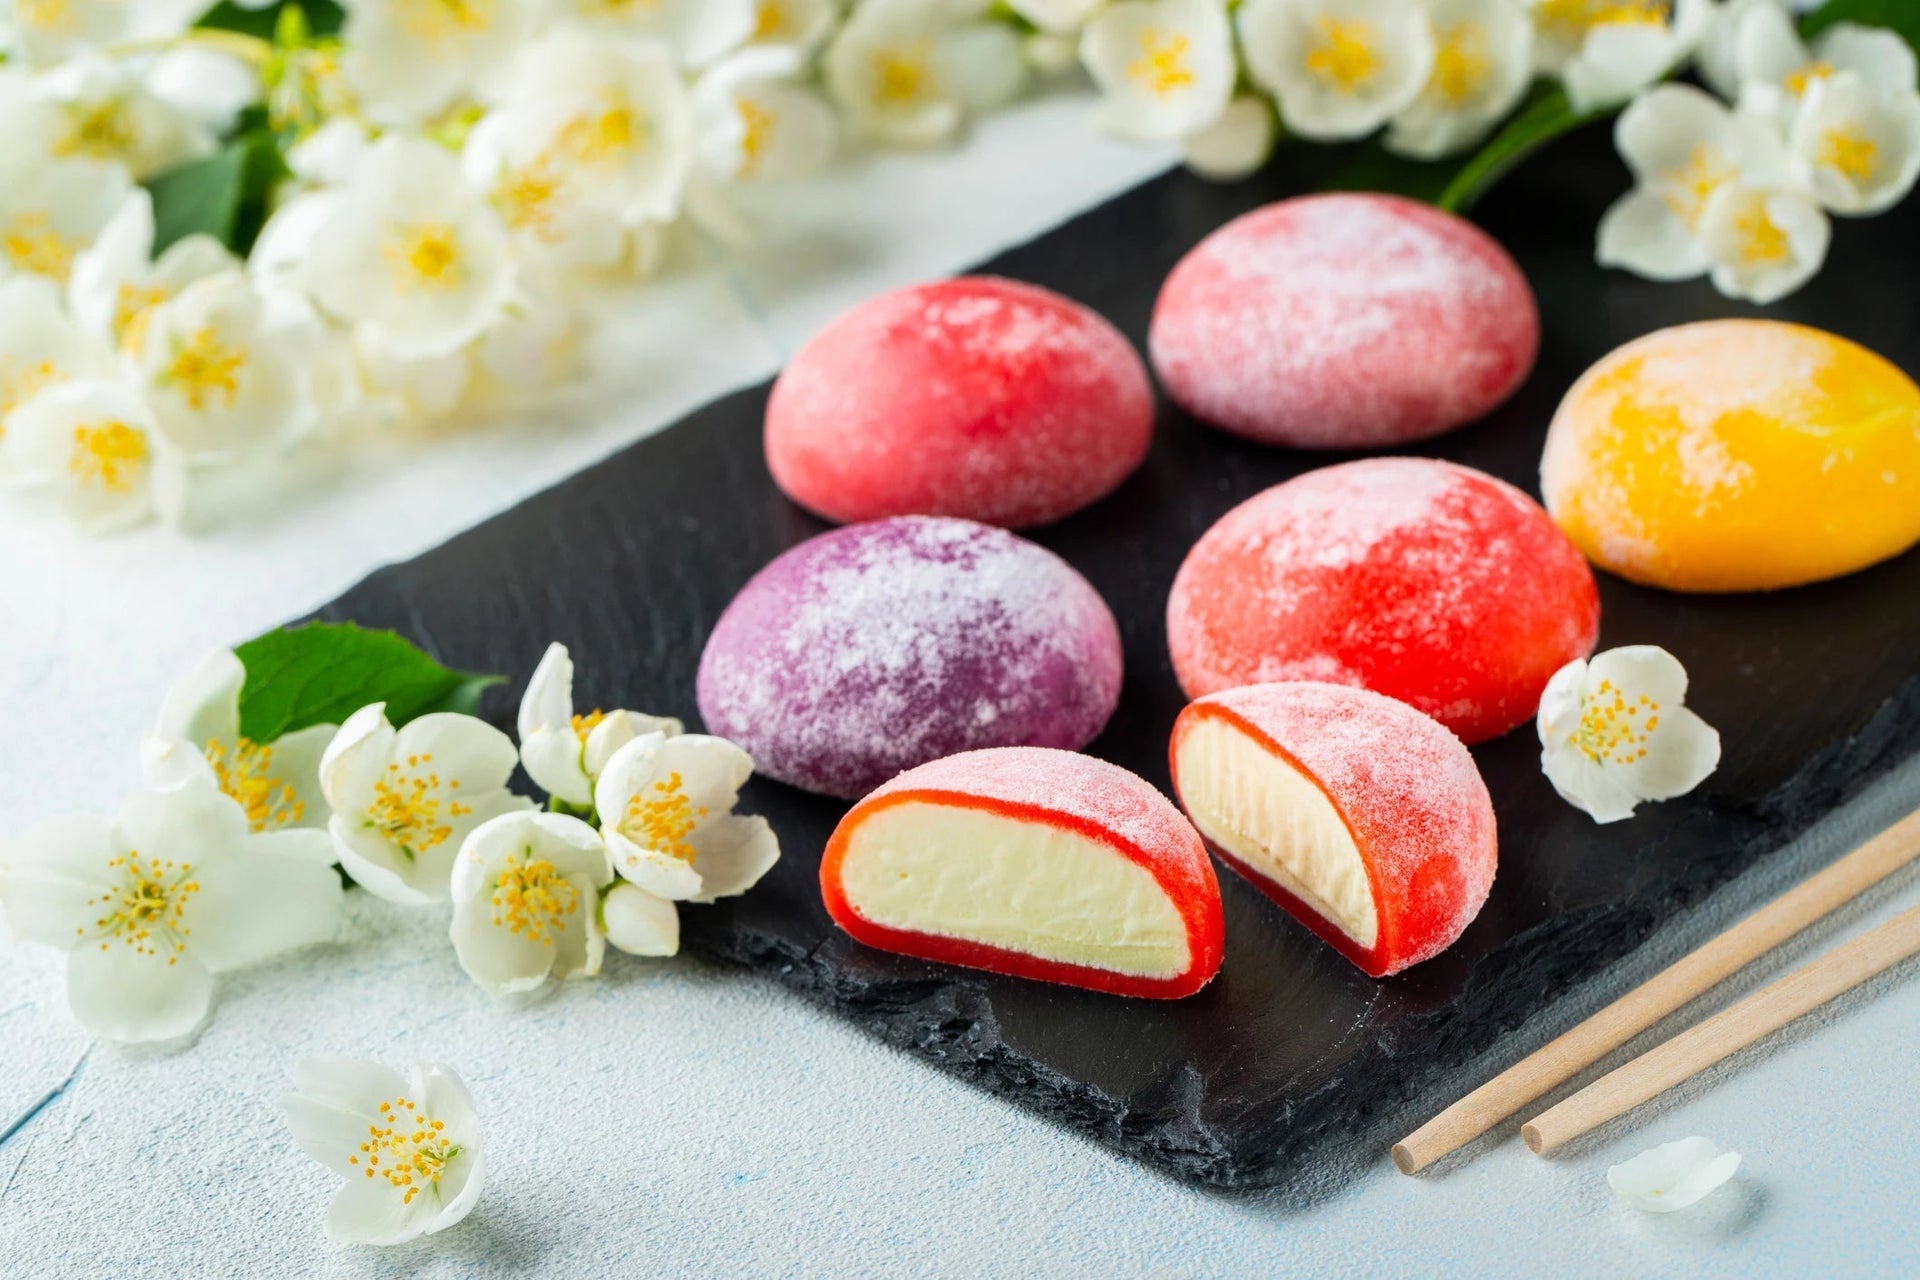 Japanese Sweets